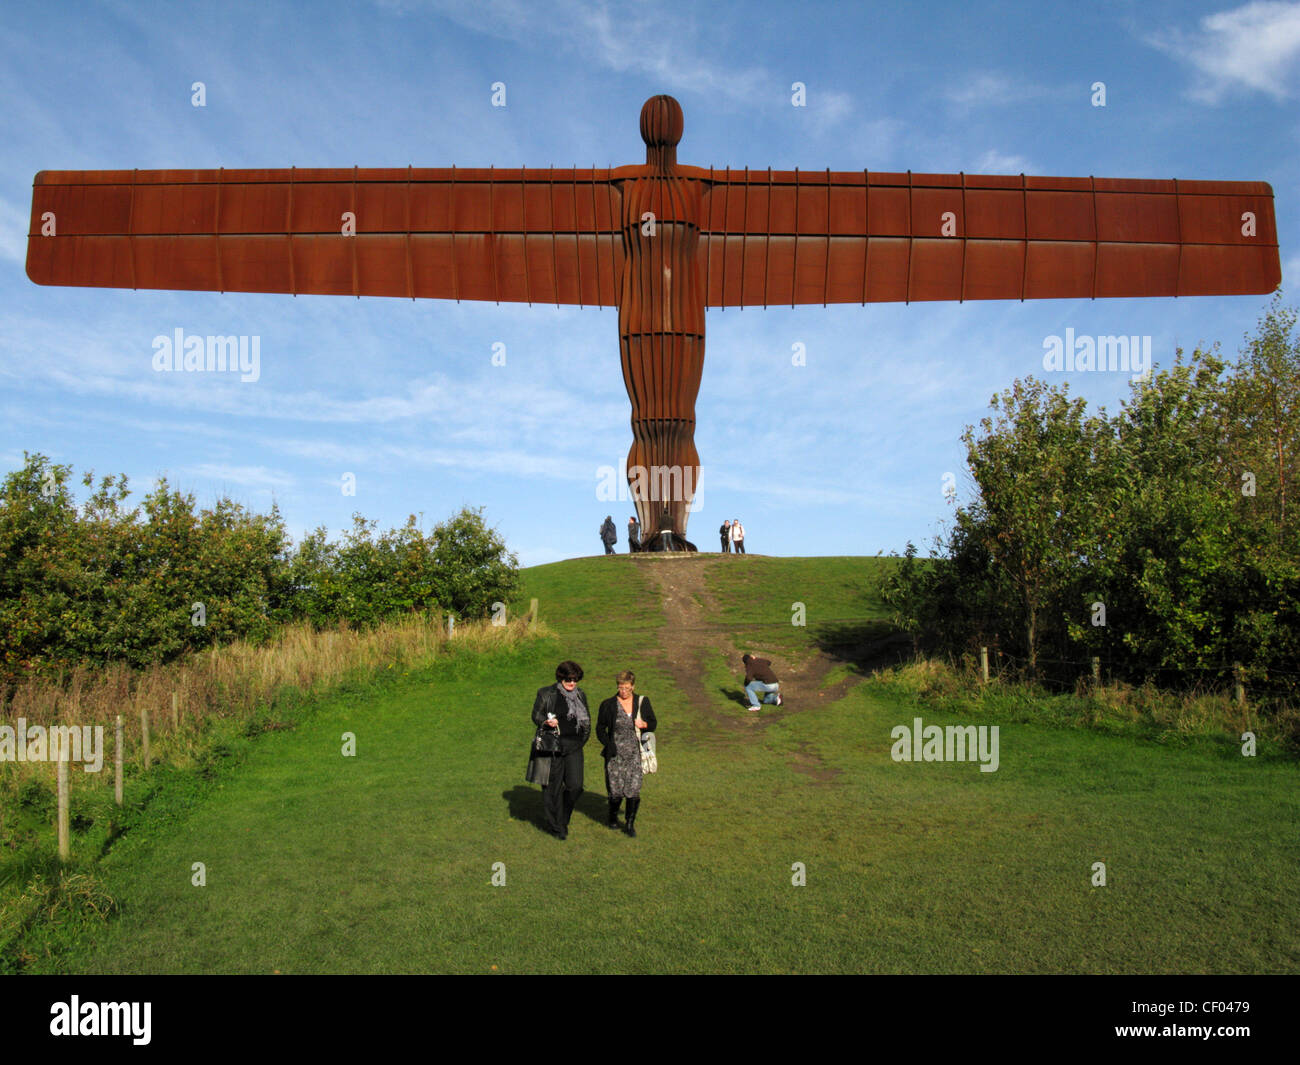 Angel of the North, a sculpture by Antony Gormley, at Gateshead Newcastle upon Tyne Stock Photo